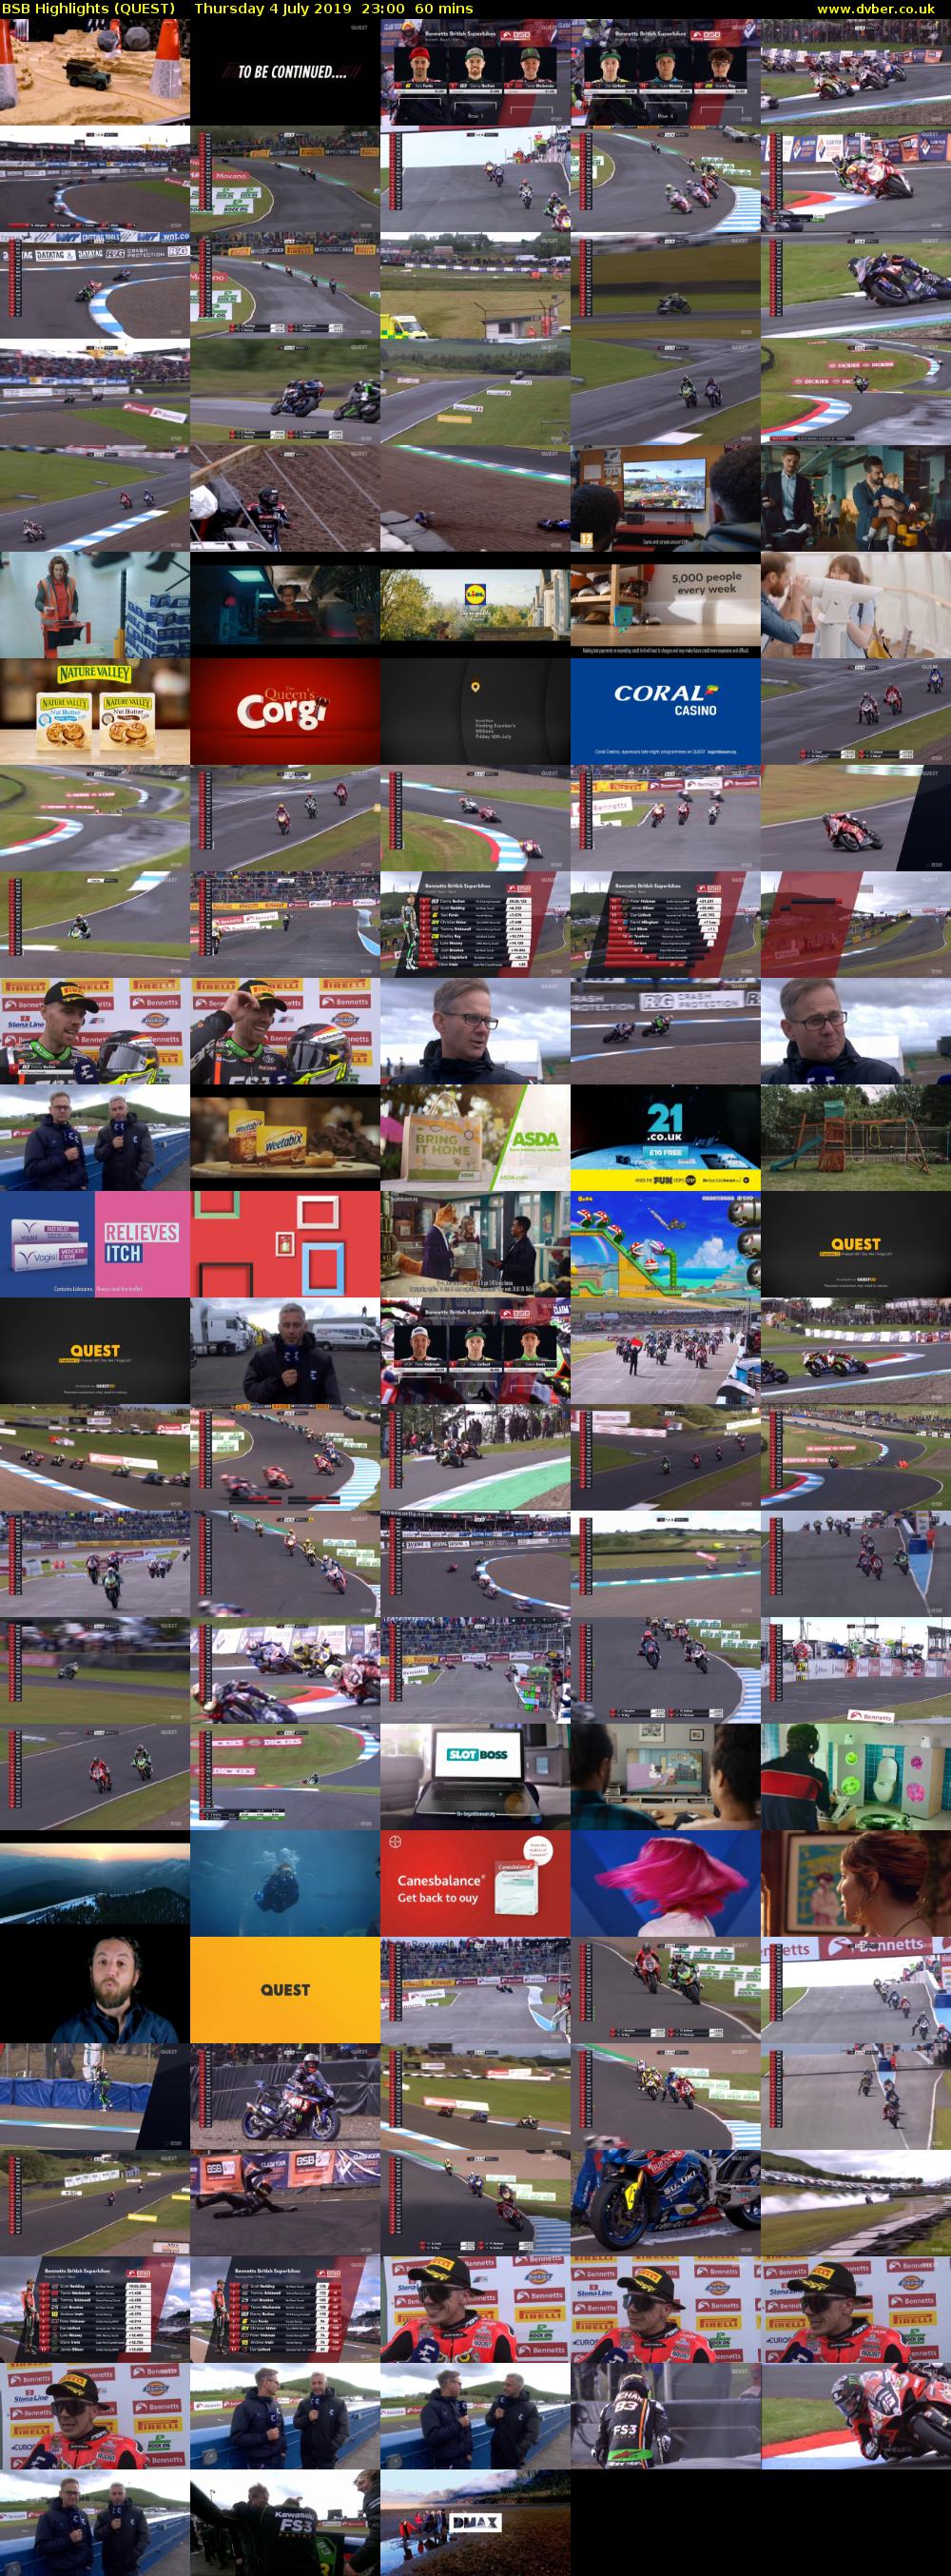 BSB Highlights (QUEST) Thursday 4 July 2019 23:00 - 00:00